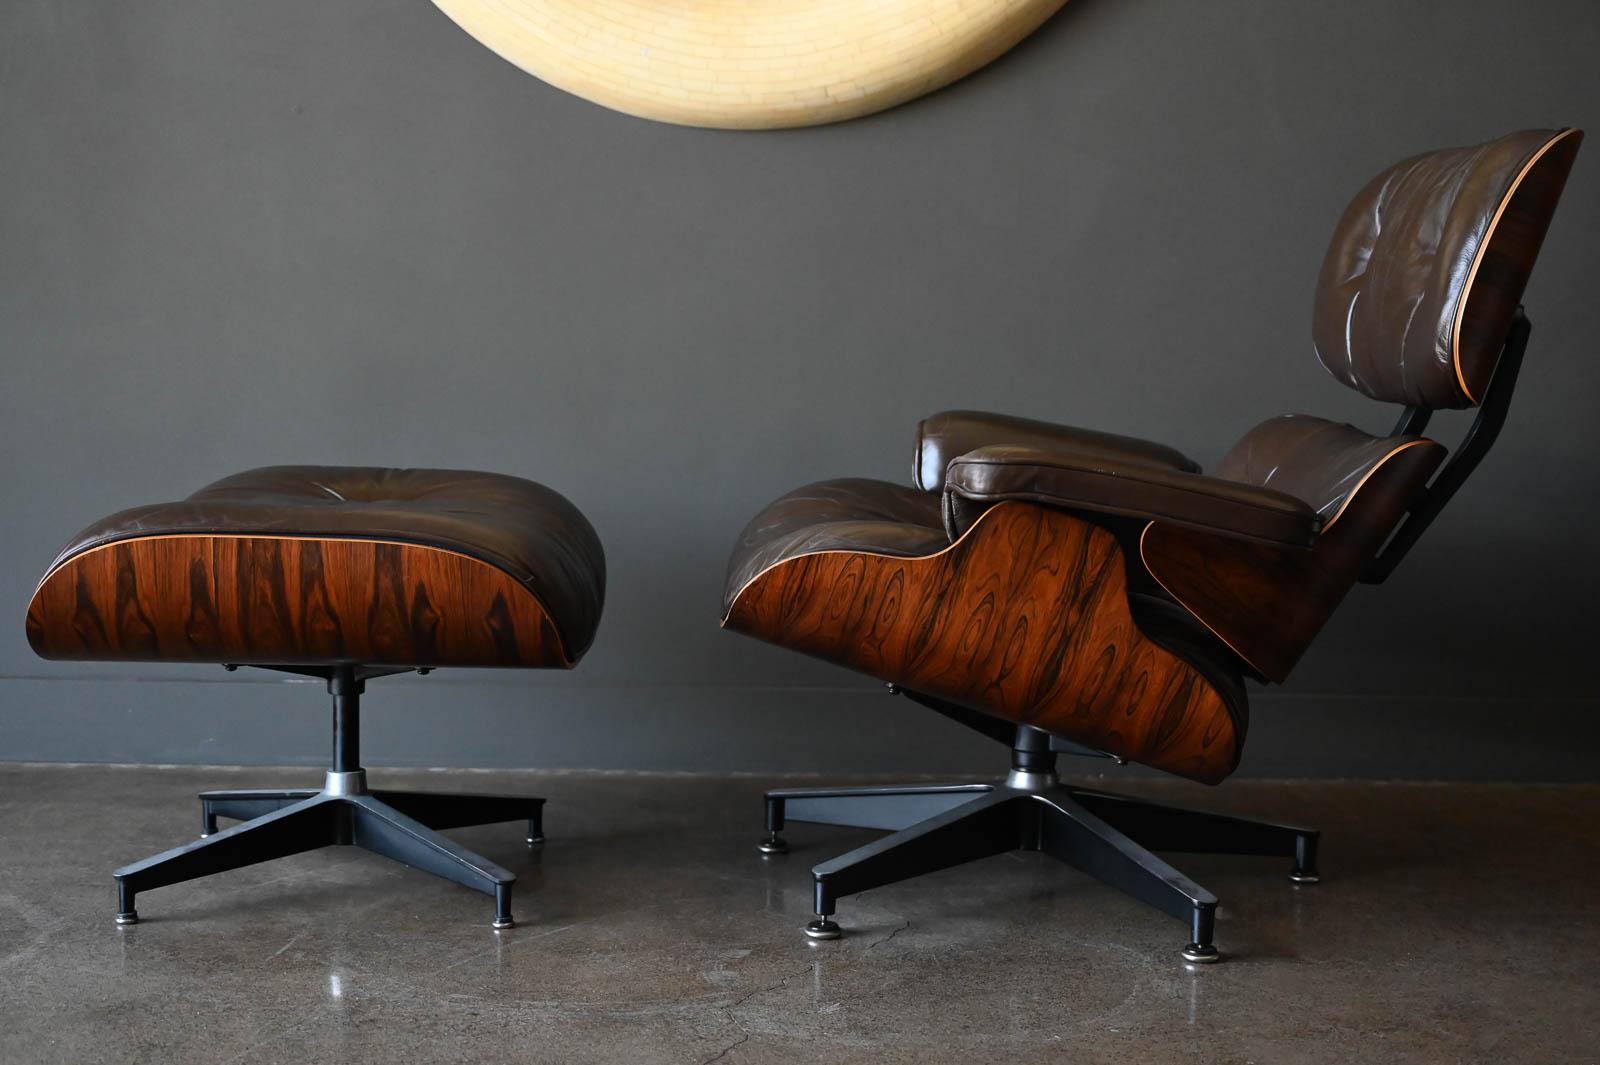 Charles Eames Lounge Chair and Ottoman in Rosewood and Chocolate Brown Leather, circa. 1975. Third generation (1971-1991) in excellent original condition. Cushions have just the right amount of wear with wonderful patina and soft hand. The rosewood